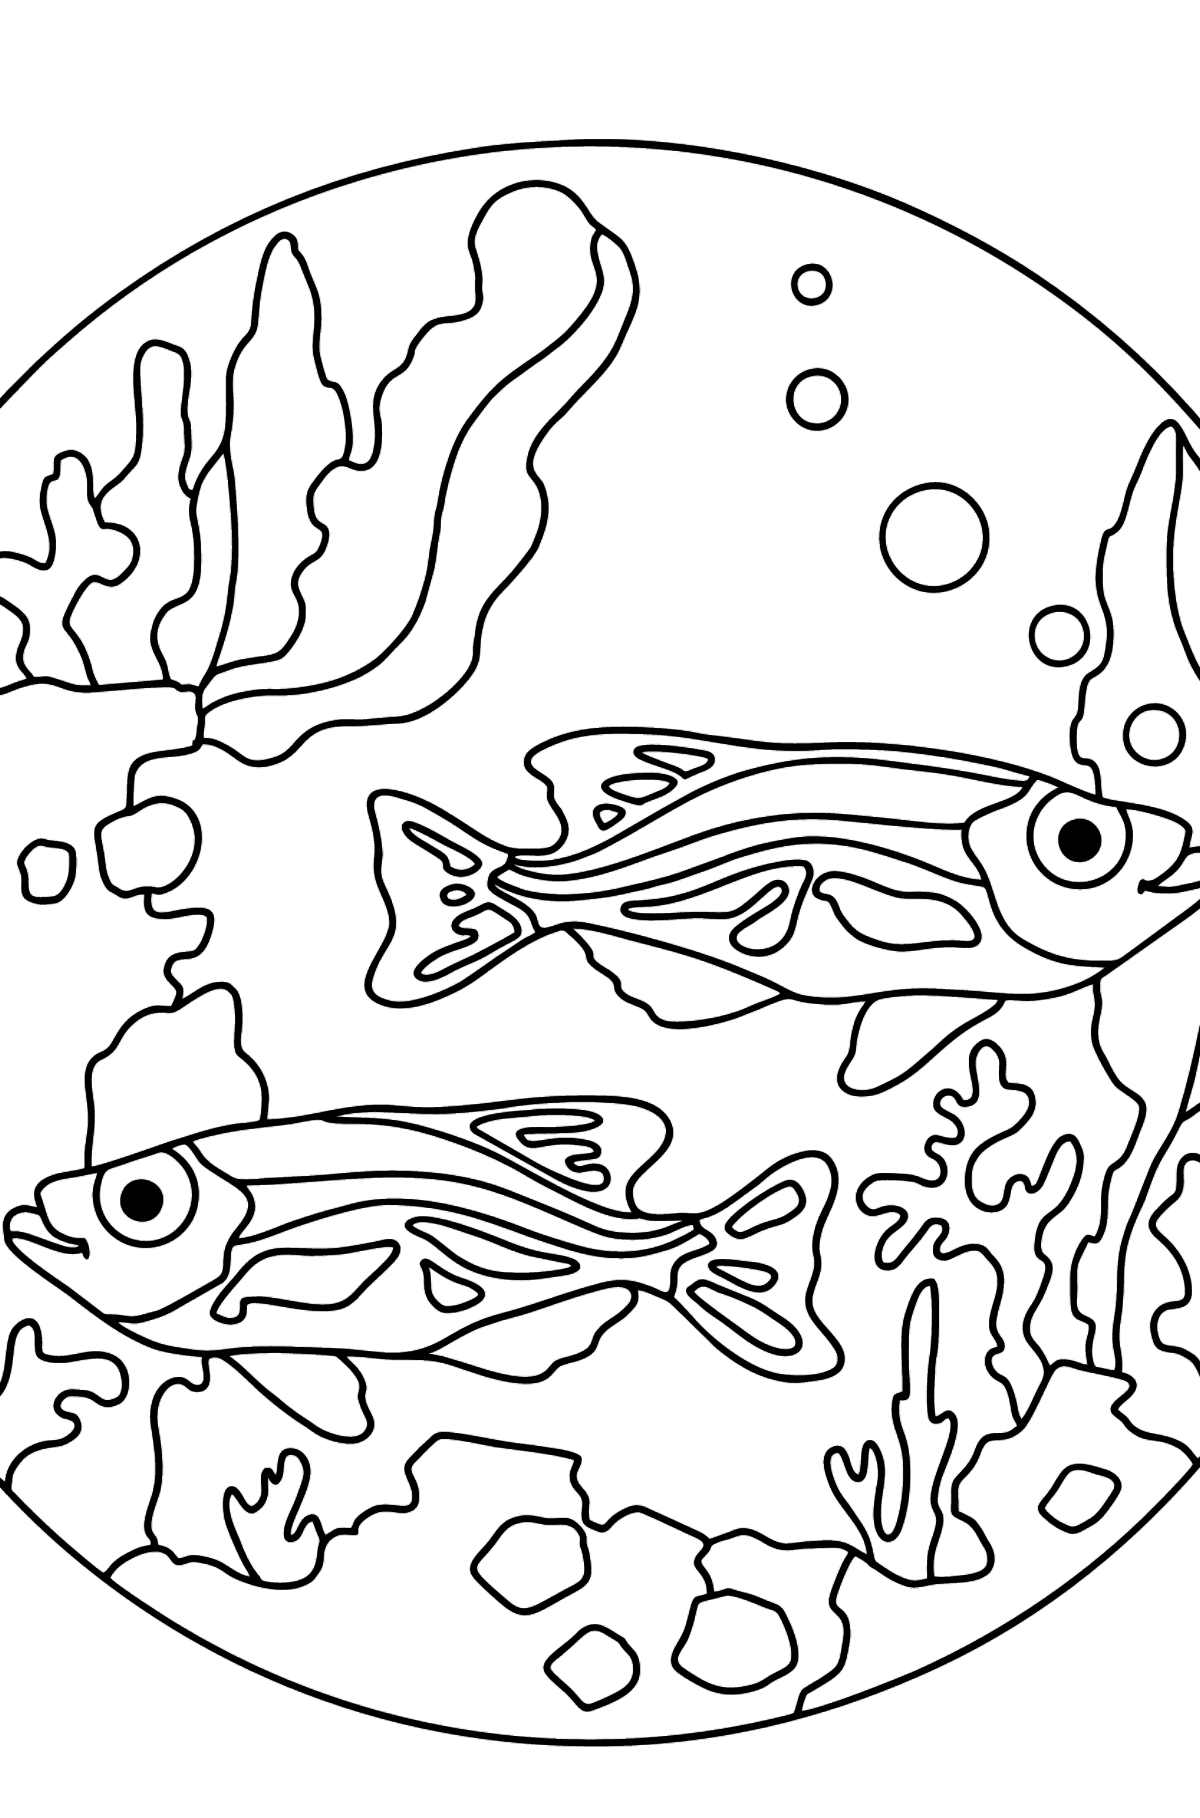 Coloring Page - Fish are Swimming - Coloring Pages for Kids